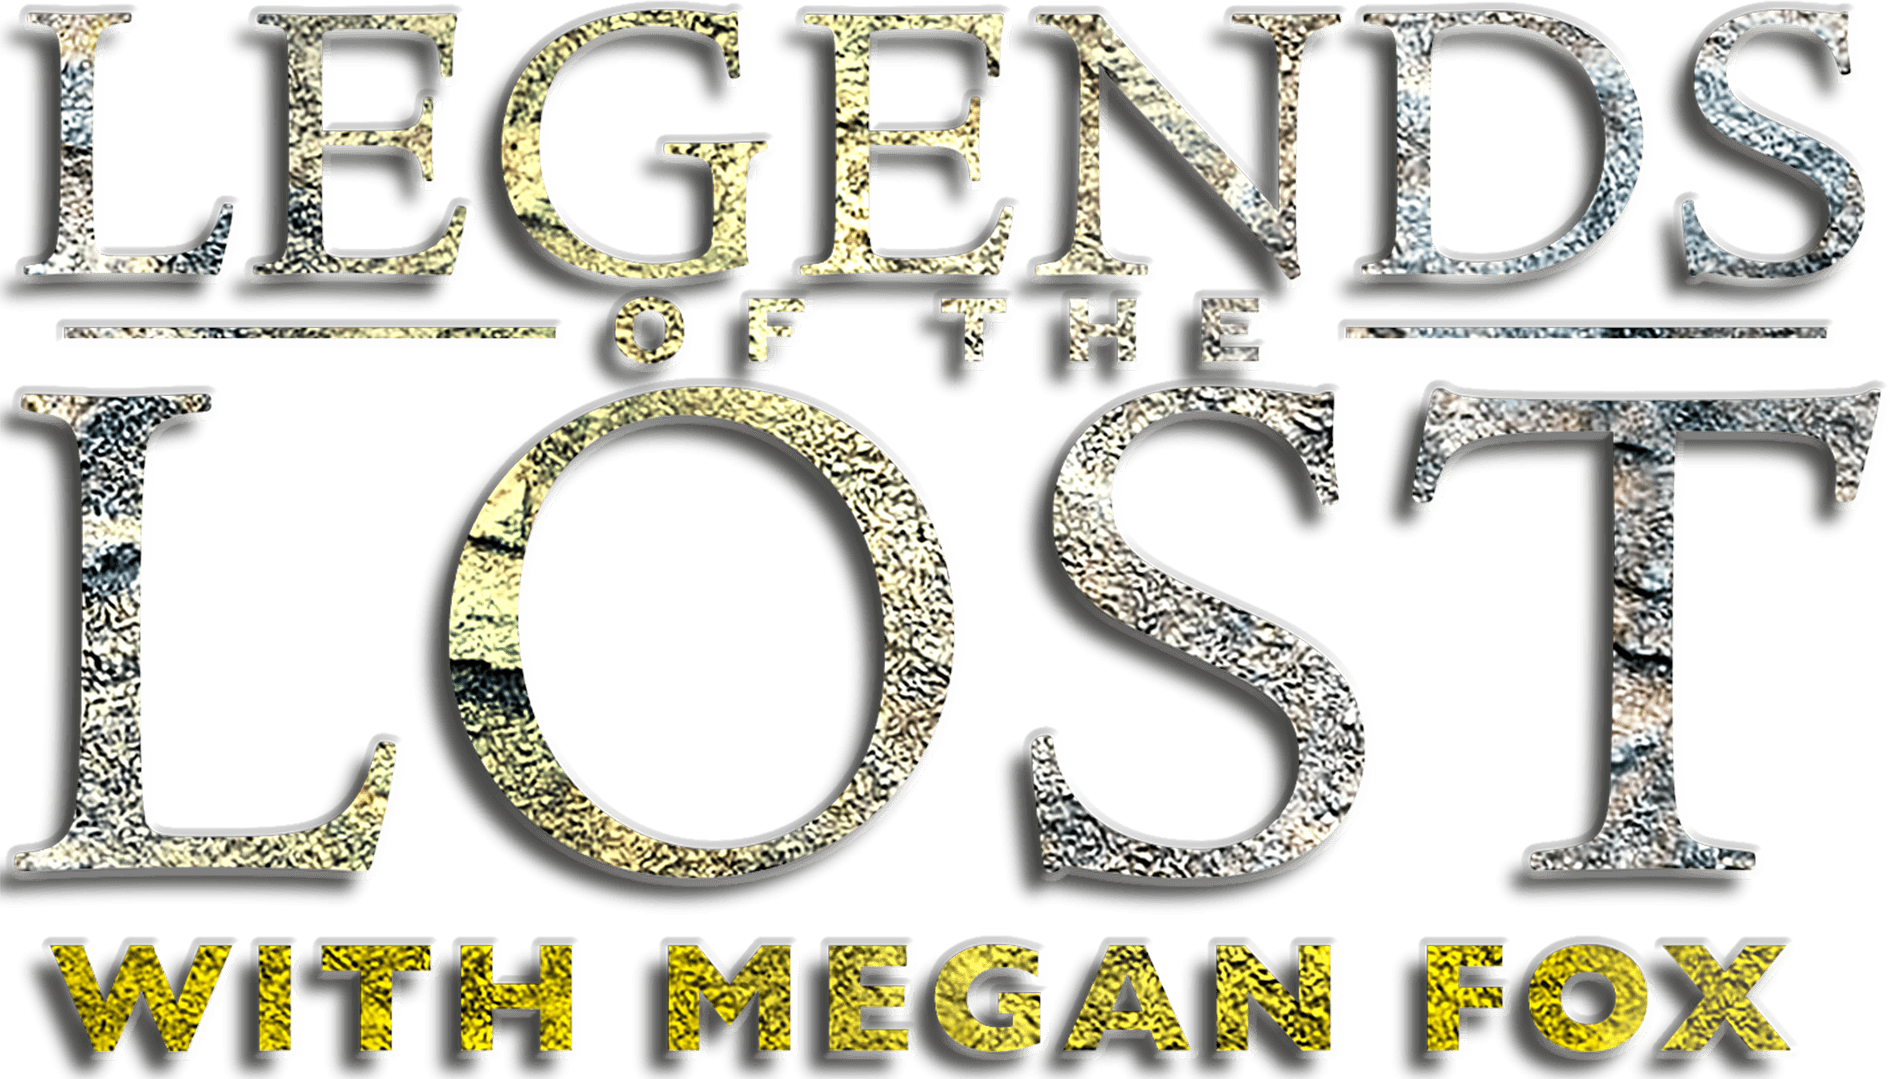 Legends of the Lost With Megan Fox logo